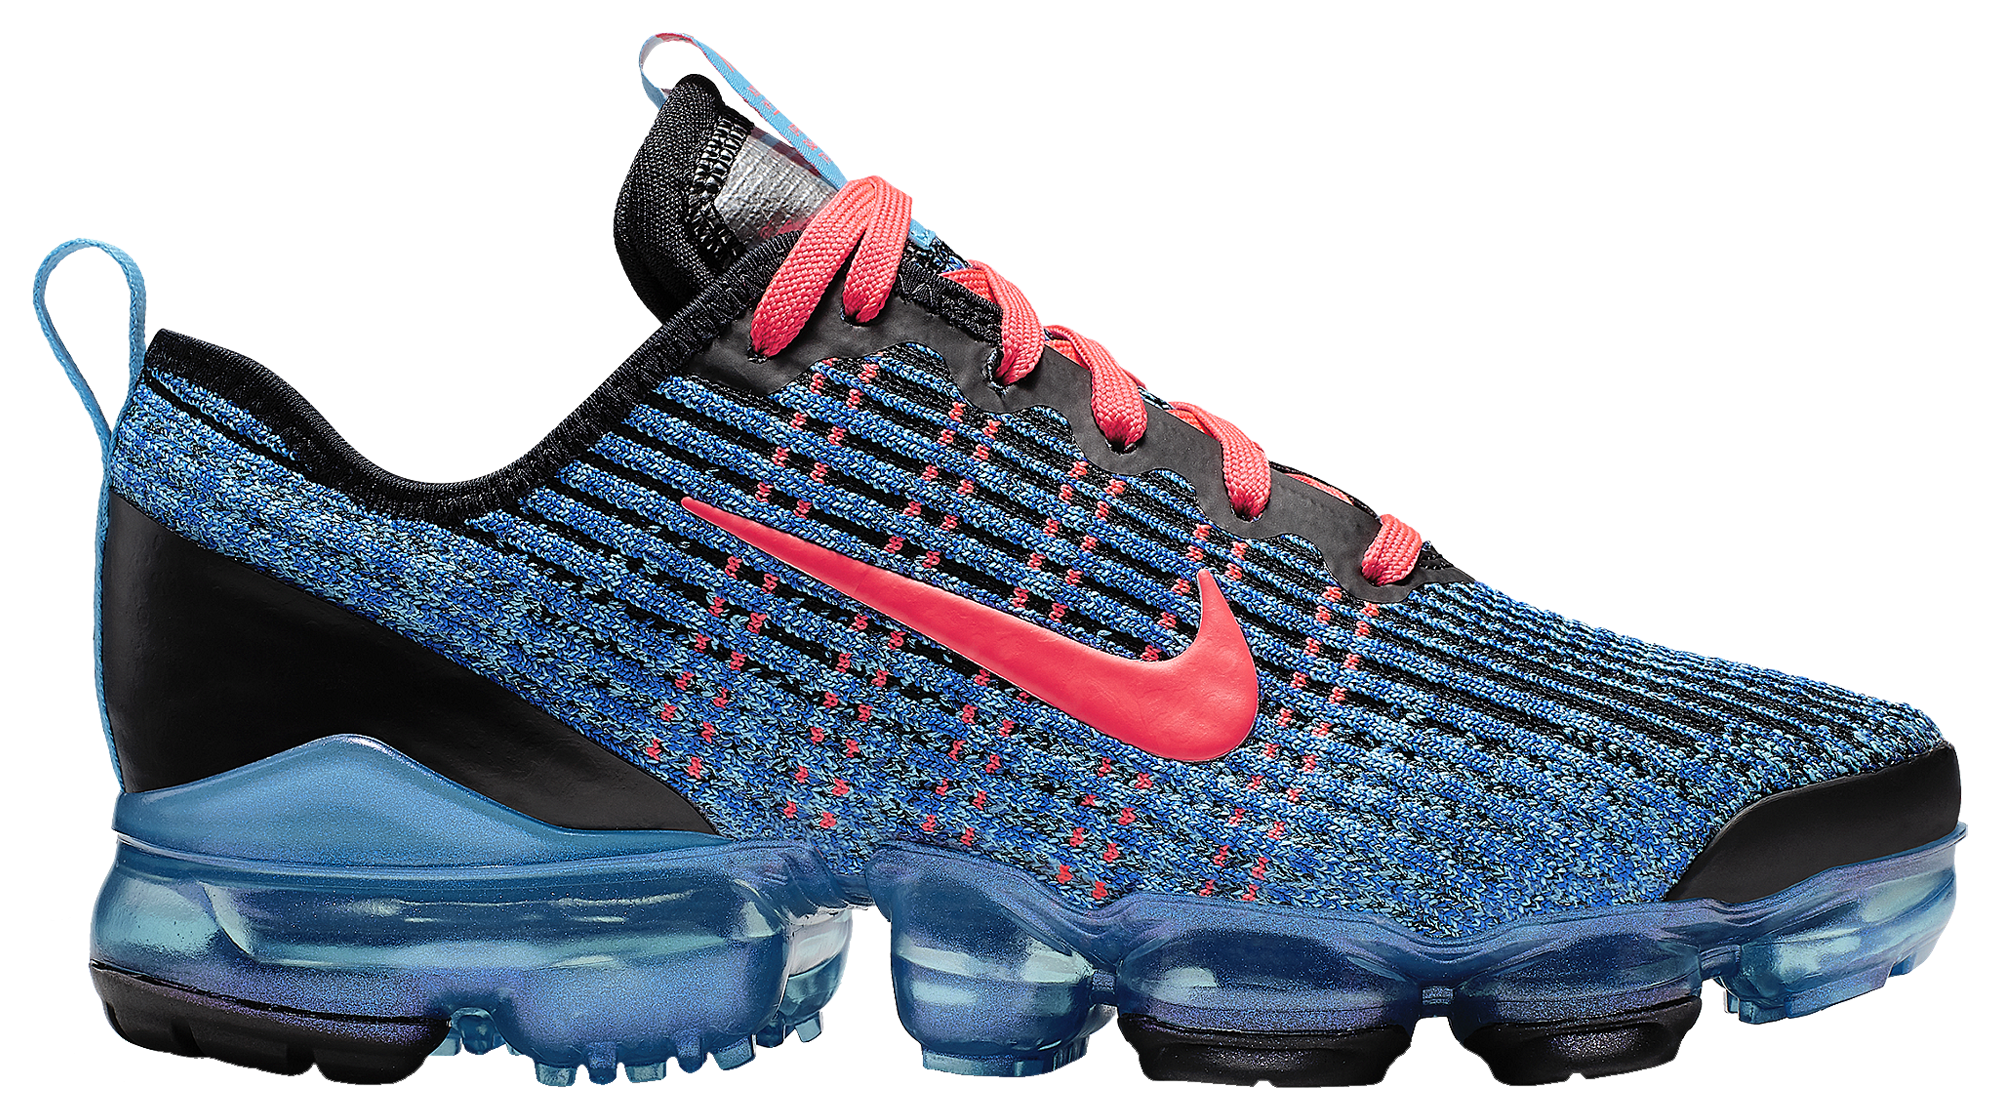 champs vapormax flyknit Shop Clothing 